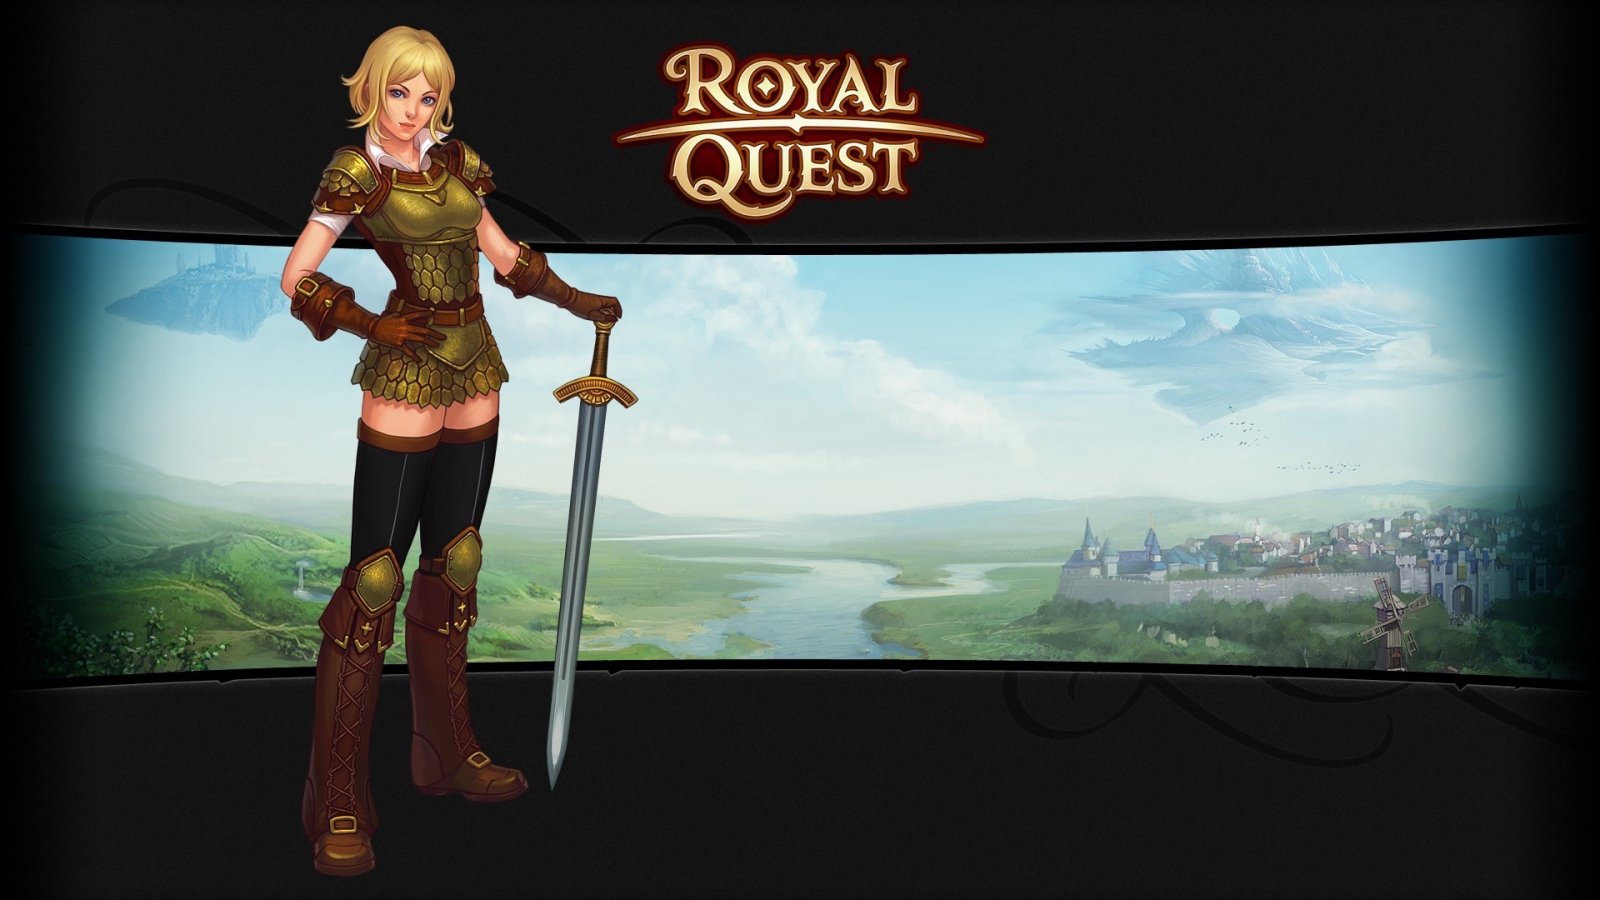 Royal Quest for 1600 x 900 HDTV resolution